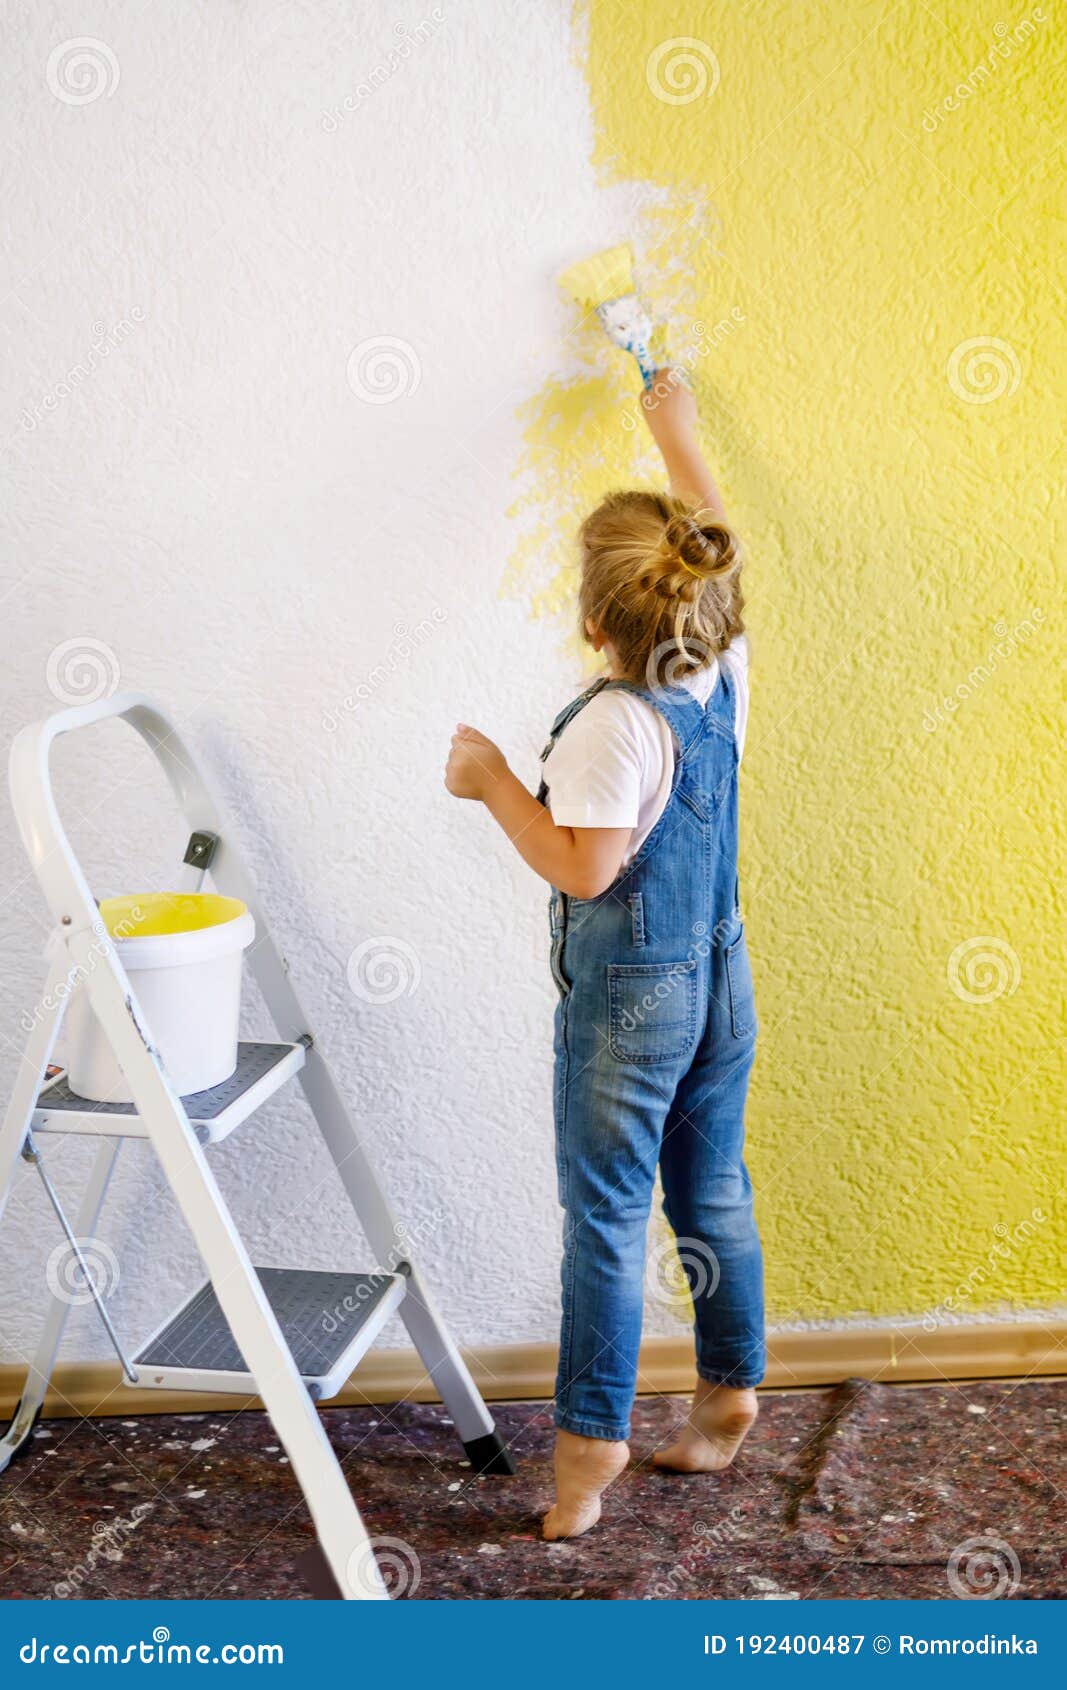 Funny Little Toddler Girl Painting the Wall with Color in New House. Family  Repair Apartment Home Stock Image - Image of indoors, cute: 192400487